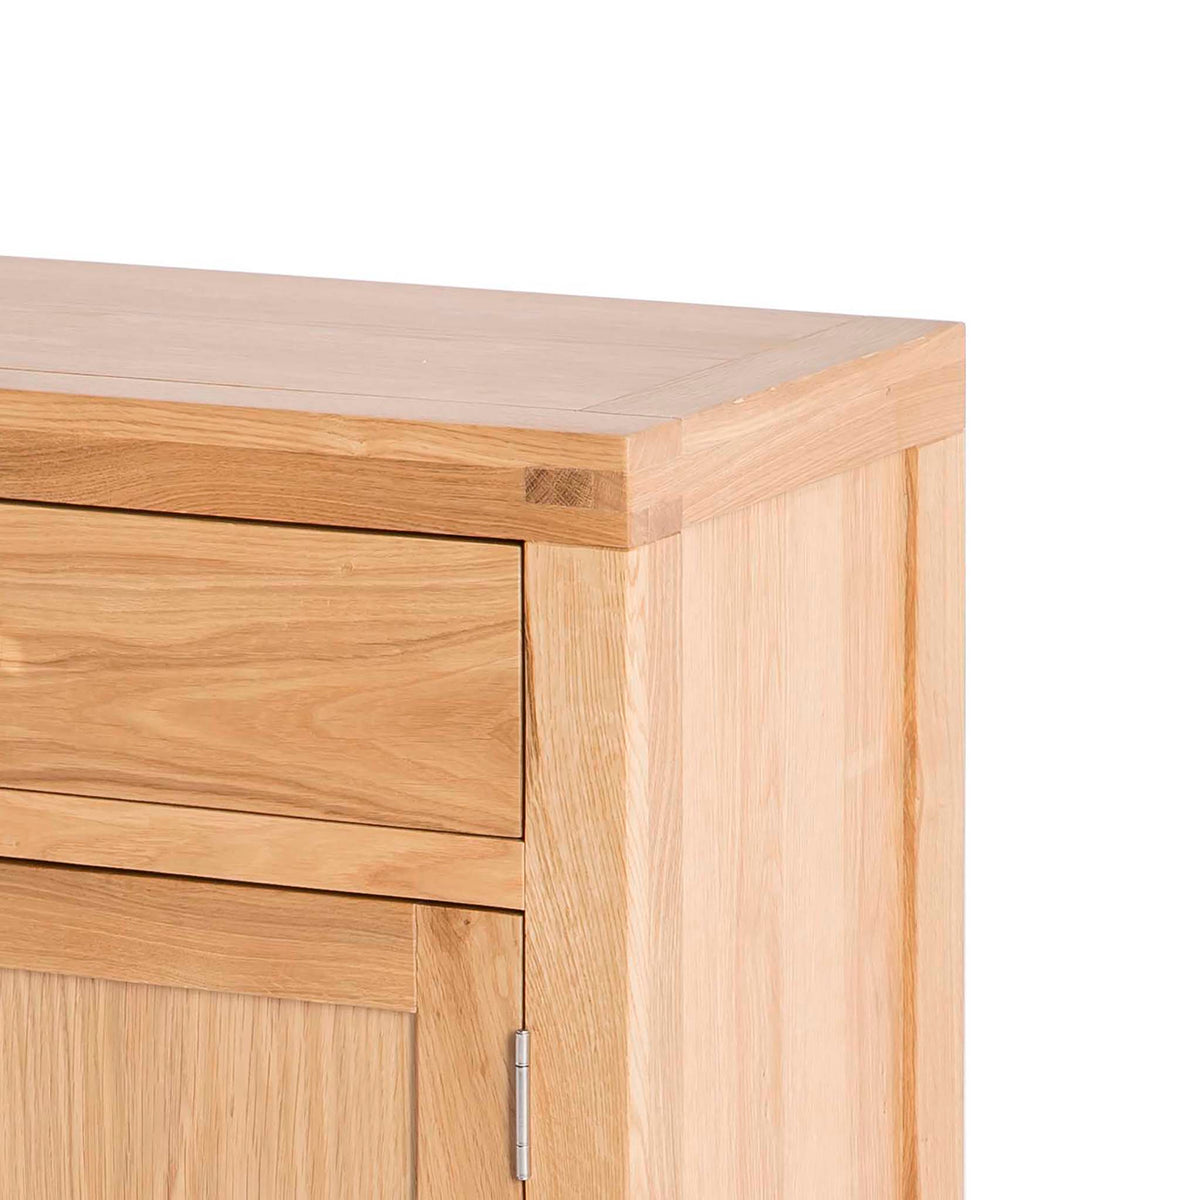 Abbey Light Oak Mini Sideboard - View of top and corner of sideboard